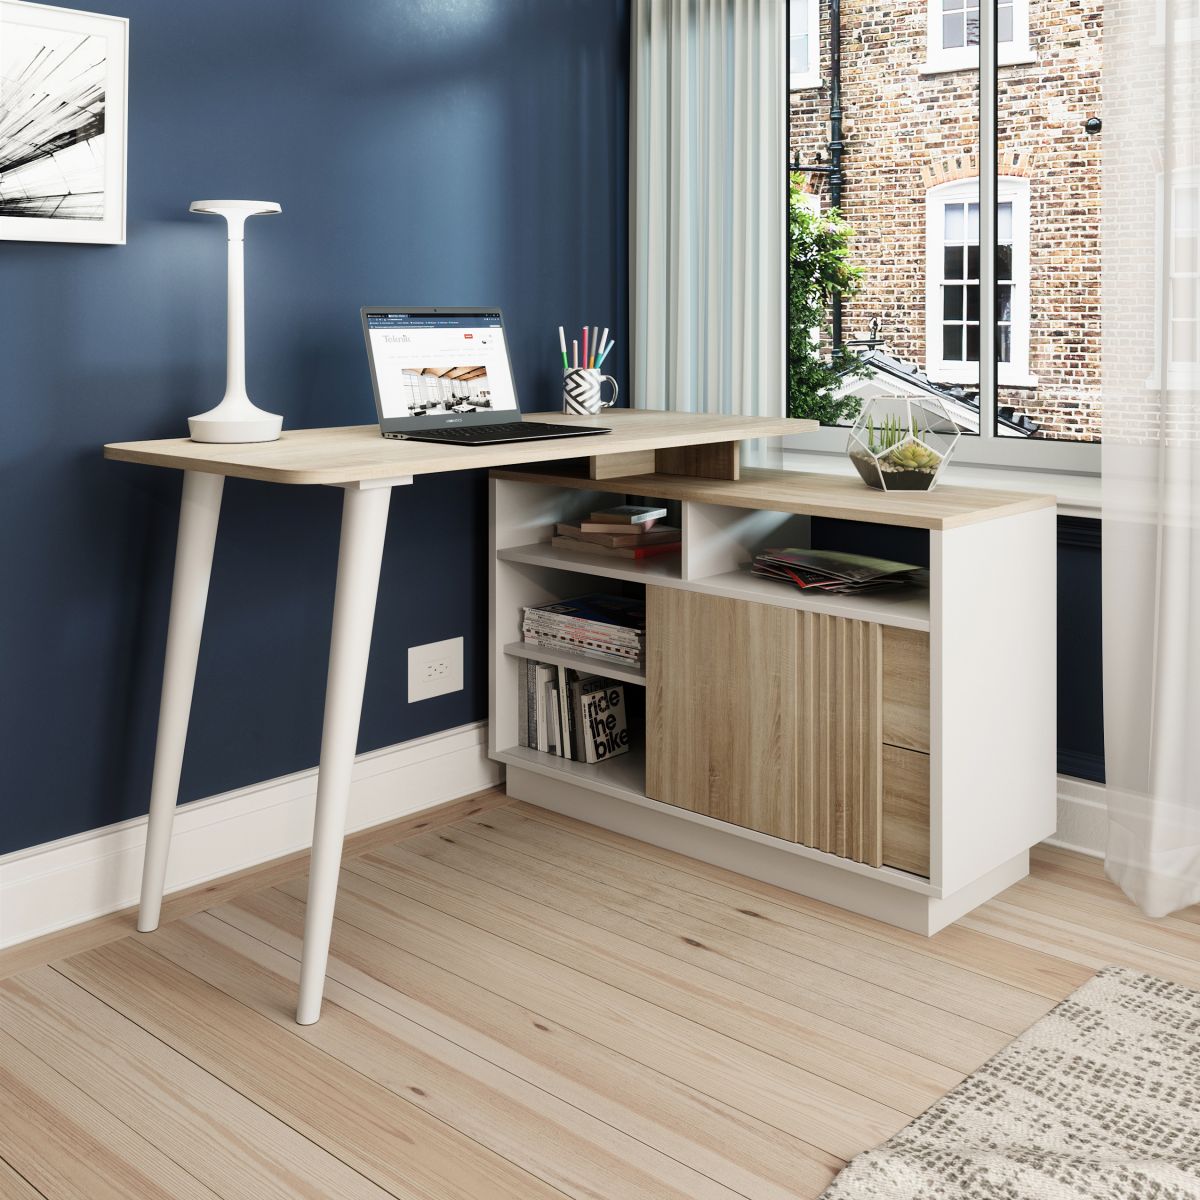 Scandinavian Style Office Desk With Storage Drawers